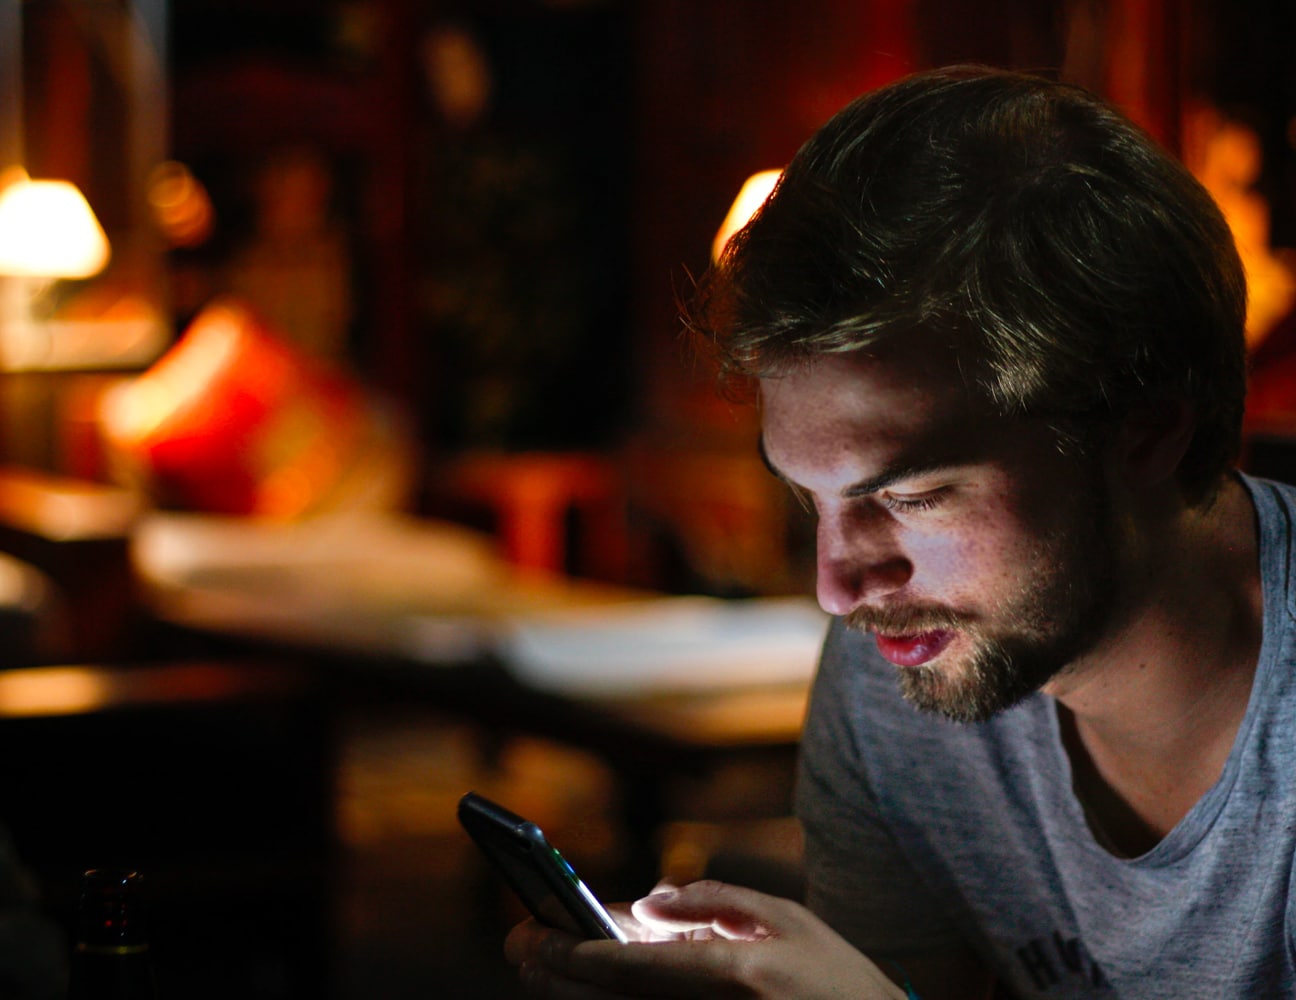 A guy scrolling on his smartphone in dim lighting.